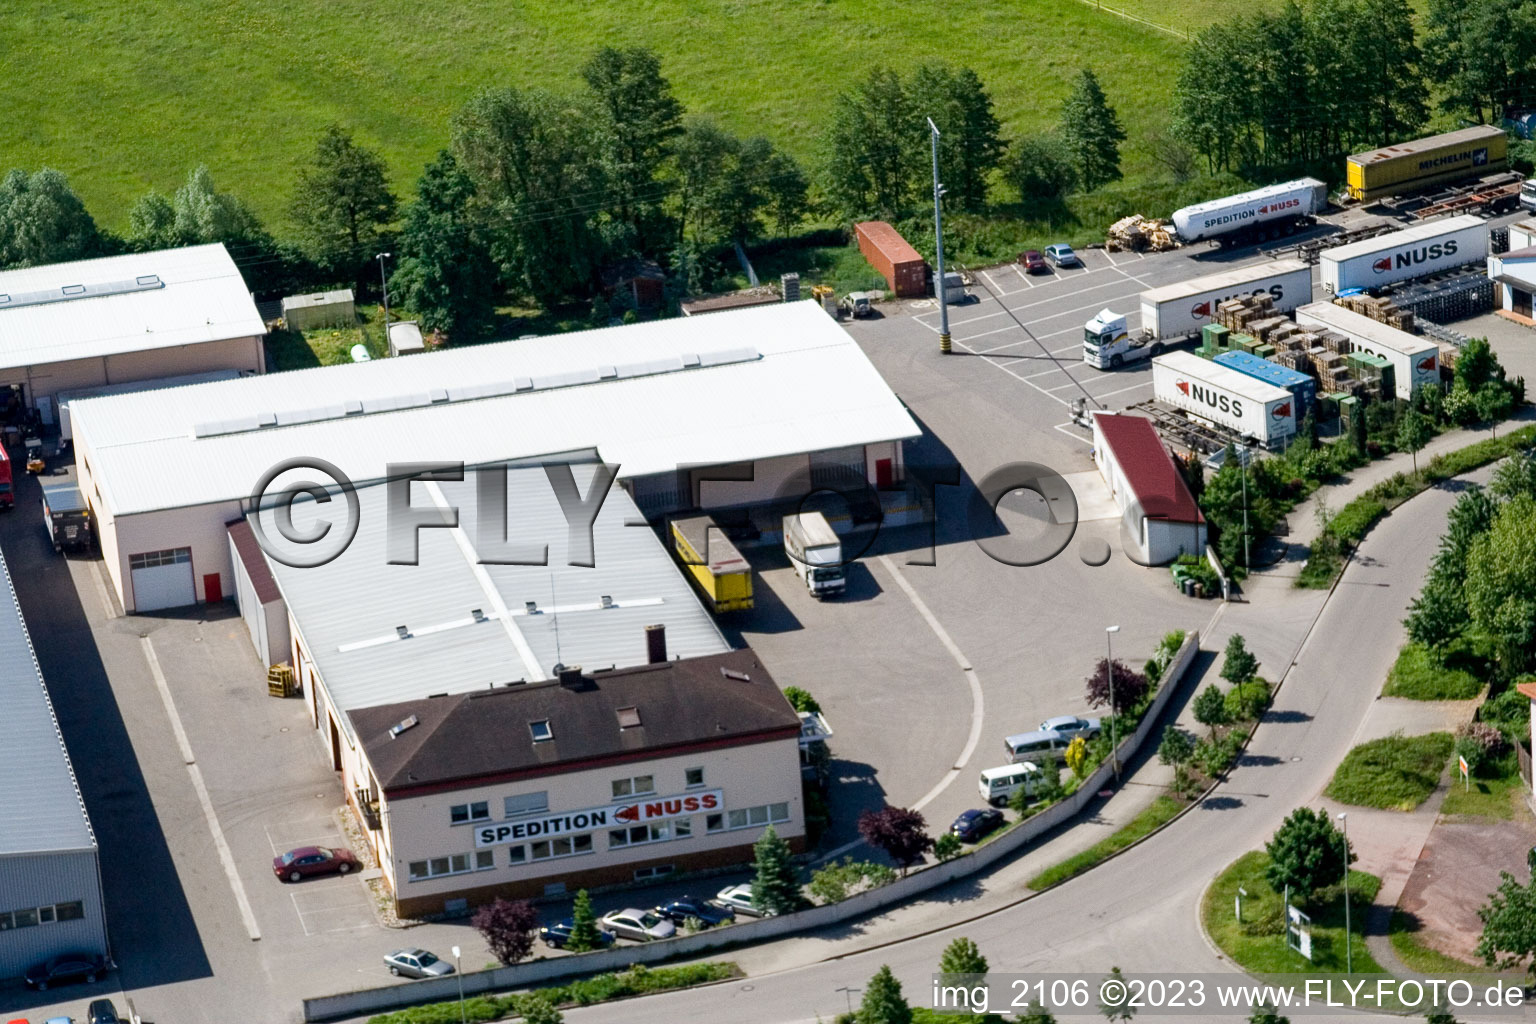 Aerial photograpy of Shipping company NUSS in the district Minderslachen in Kandel in the state Rhineland-Palatinate, Germany